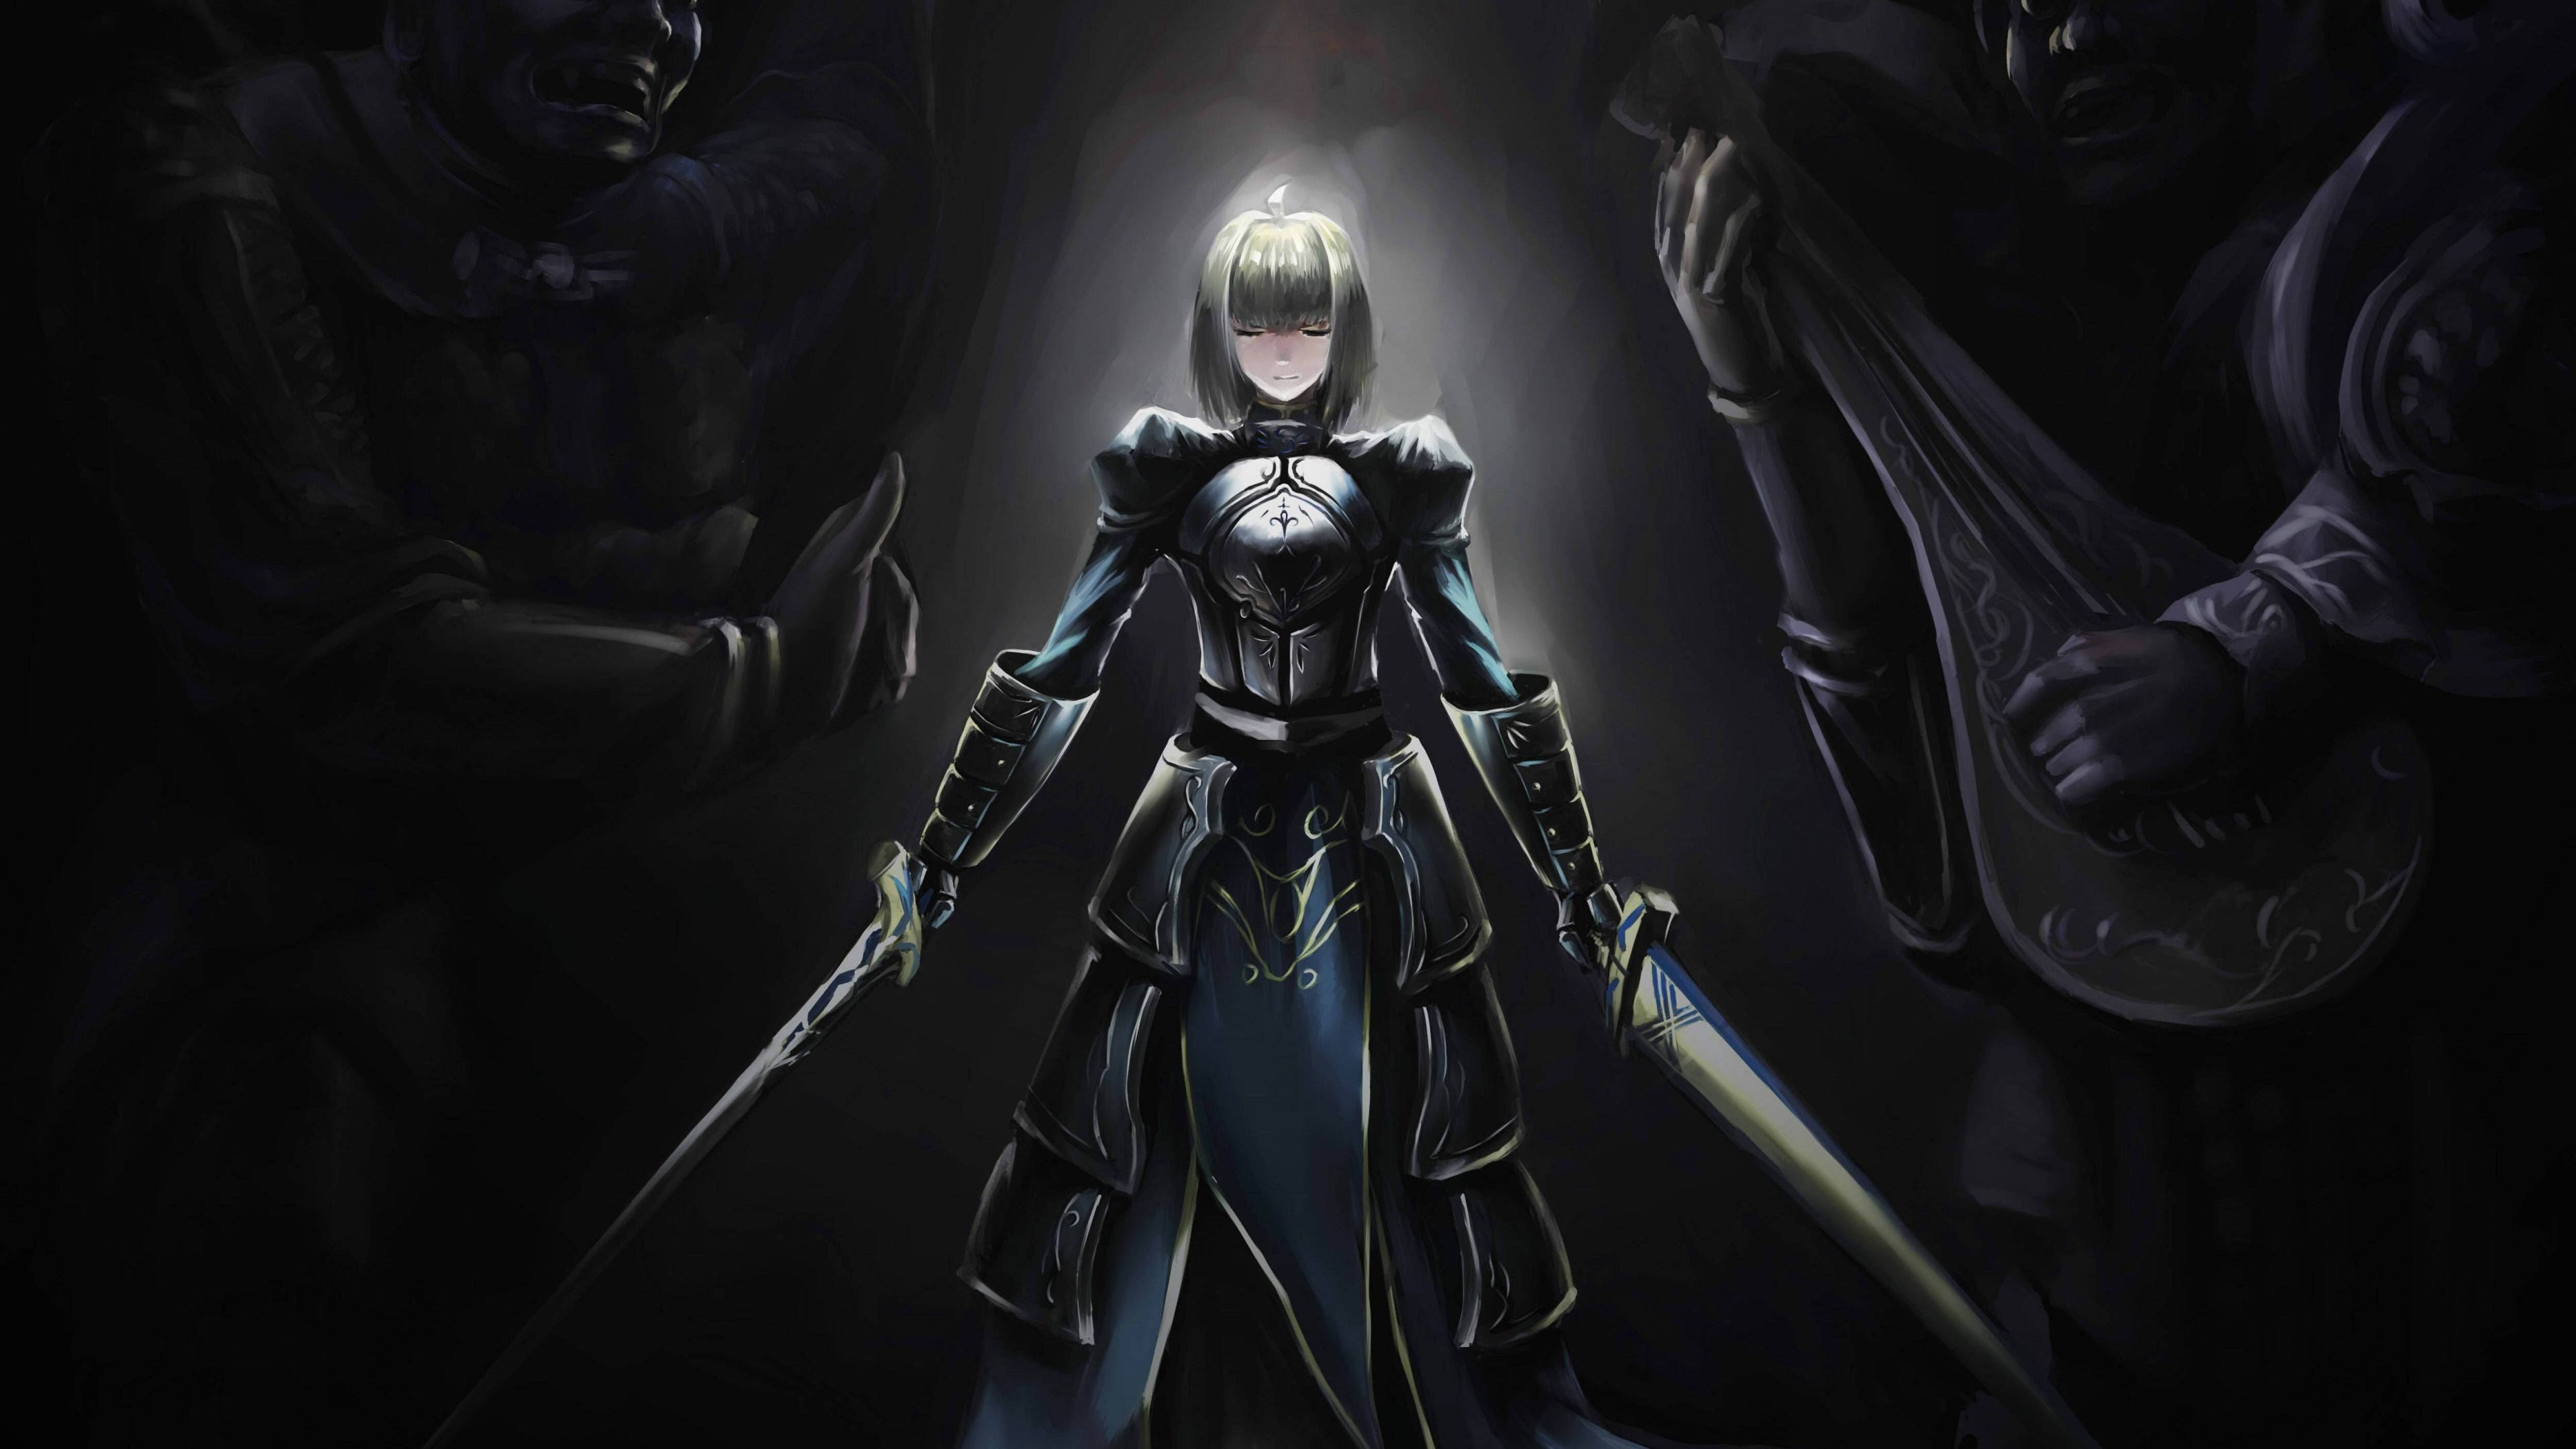 Download Fate / Stay Night Saber Wallpaper 